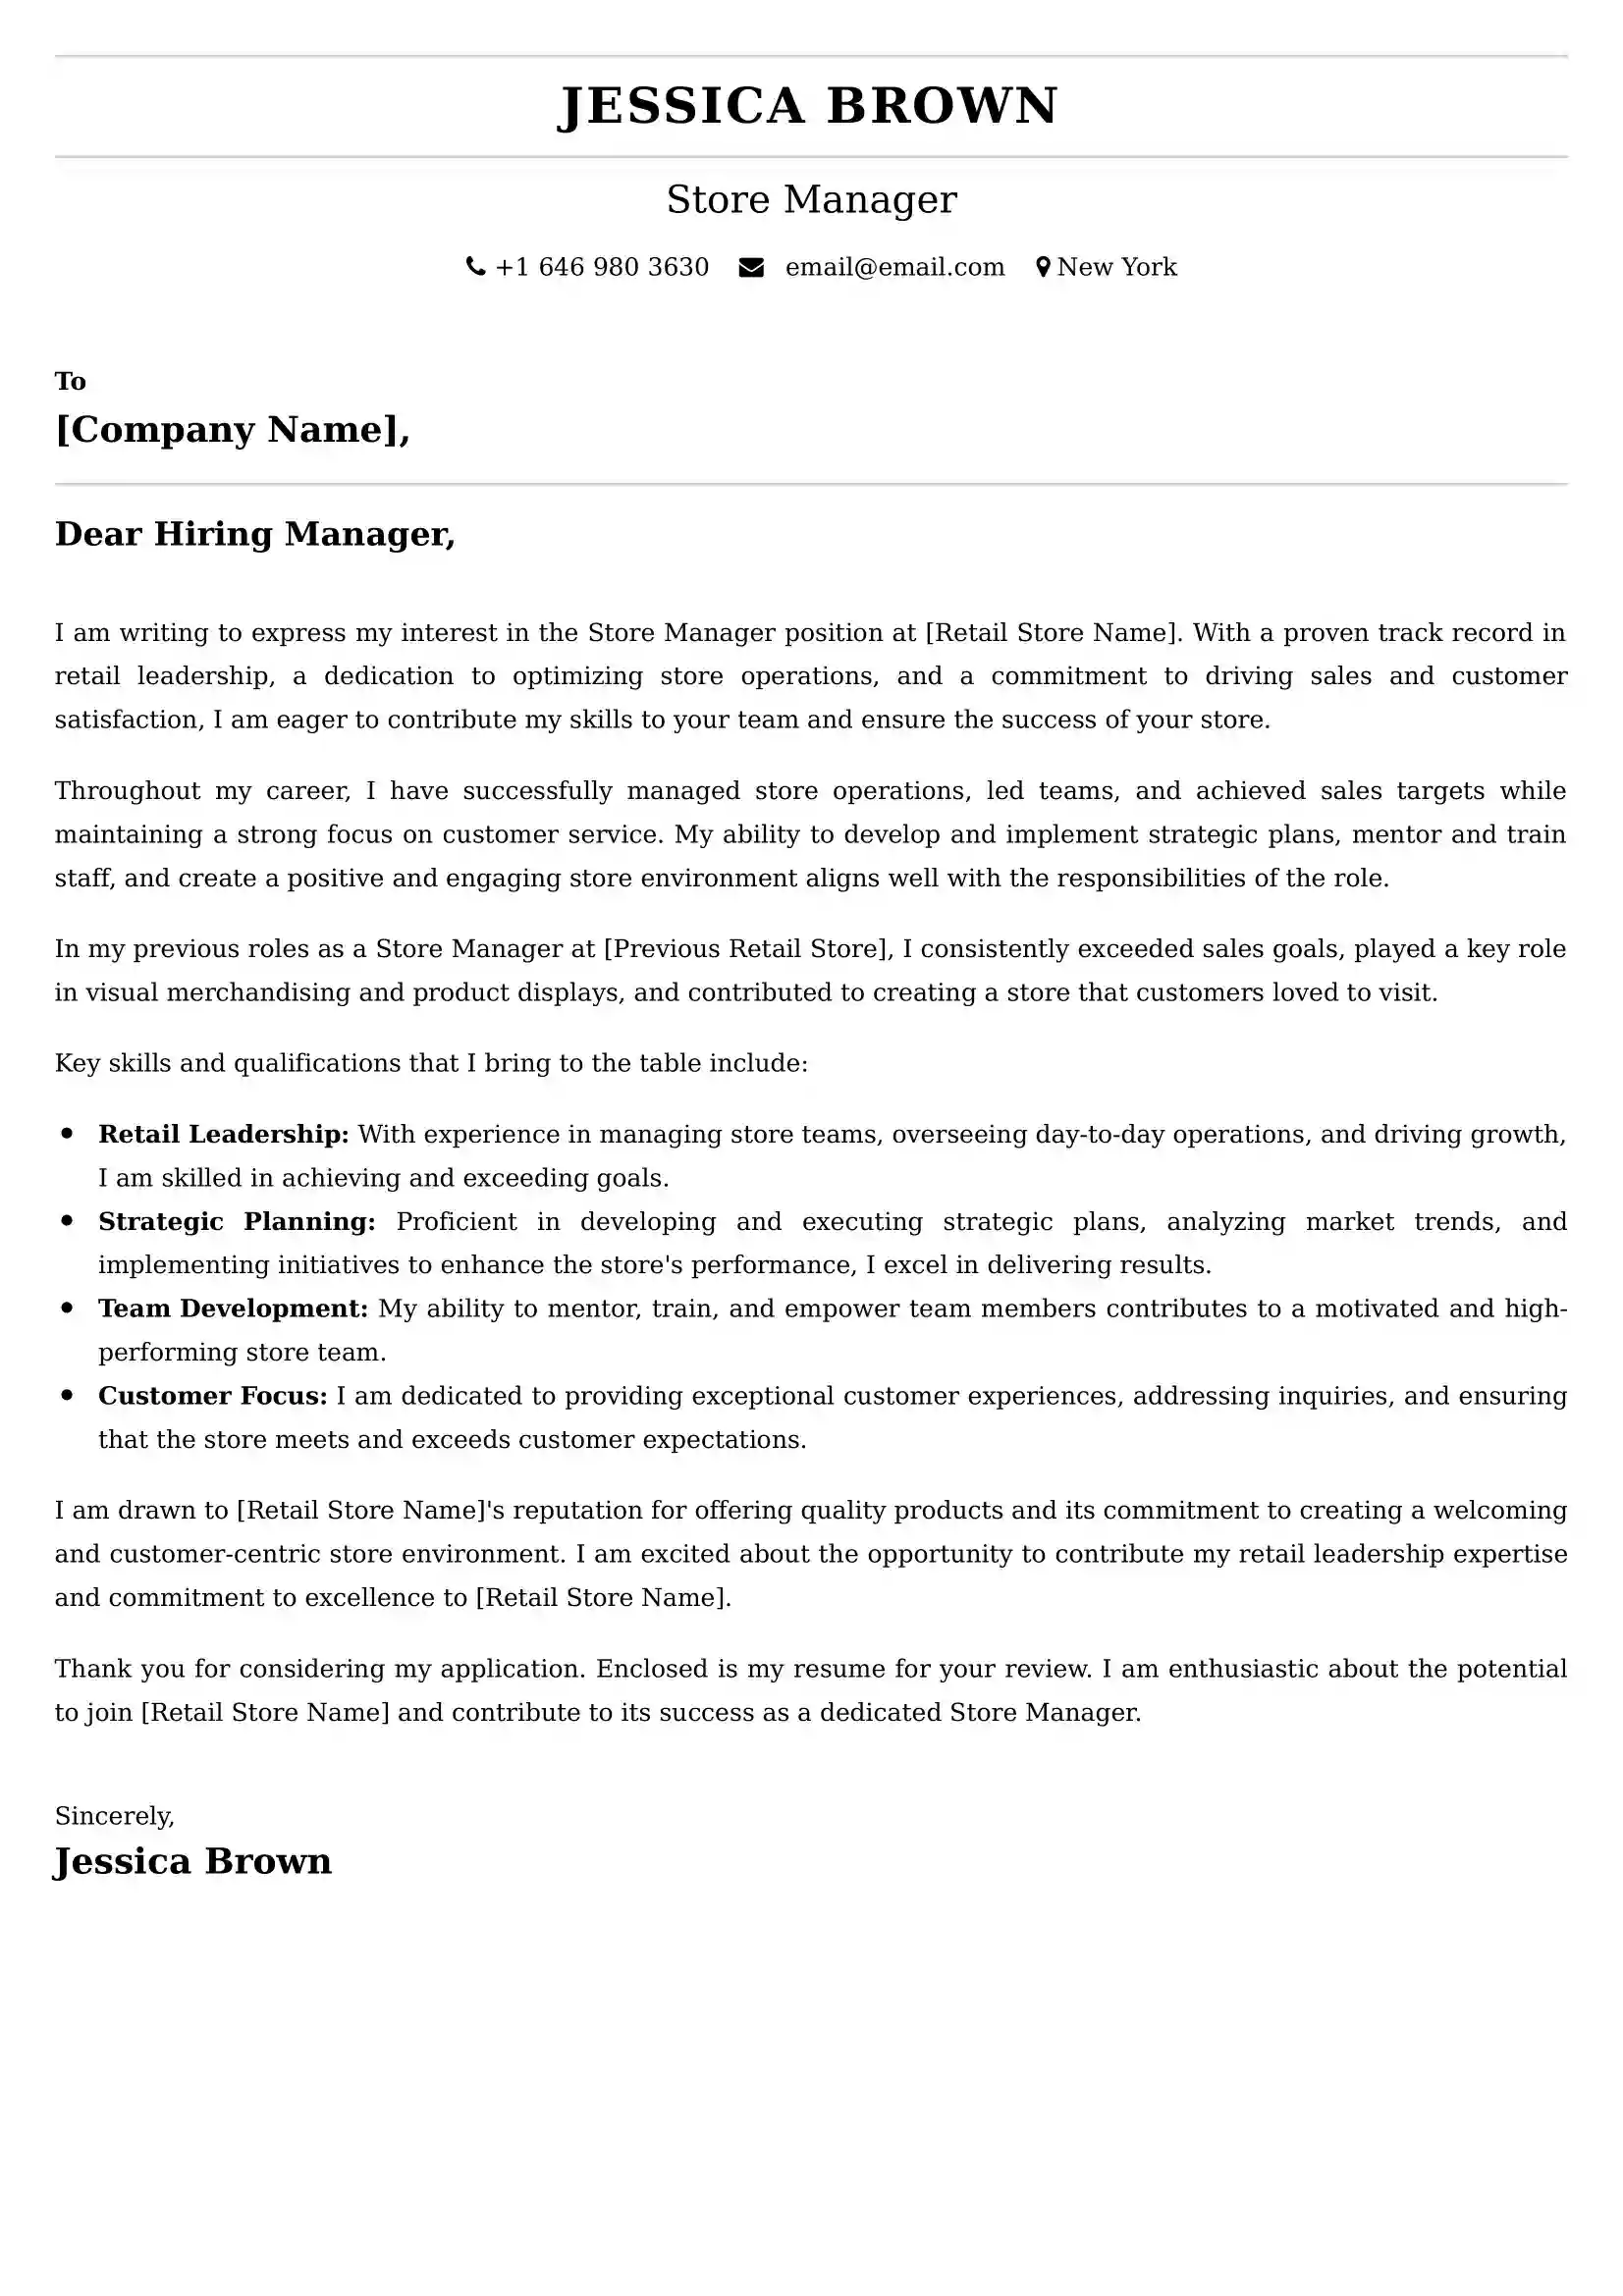 Store Manager Cover Letter Examples - Latest UK Format